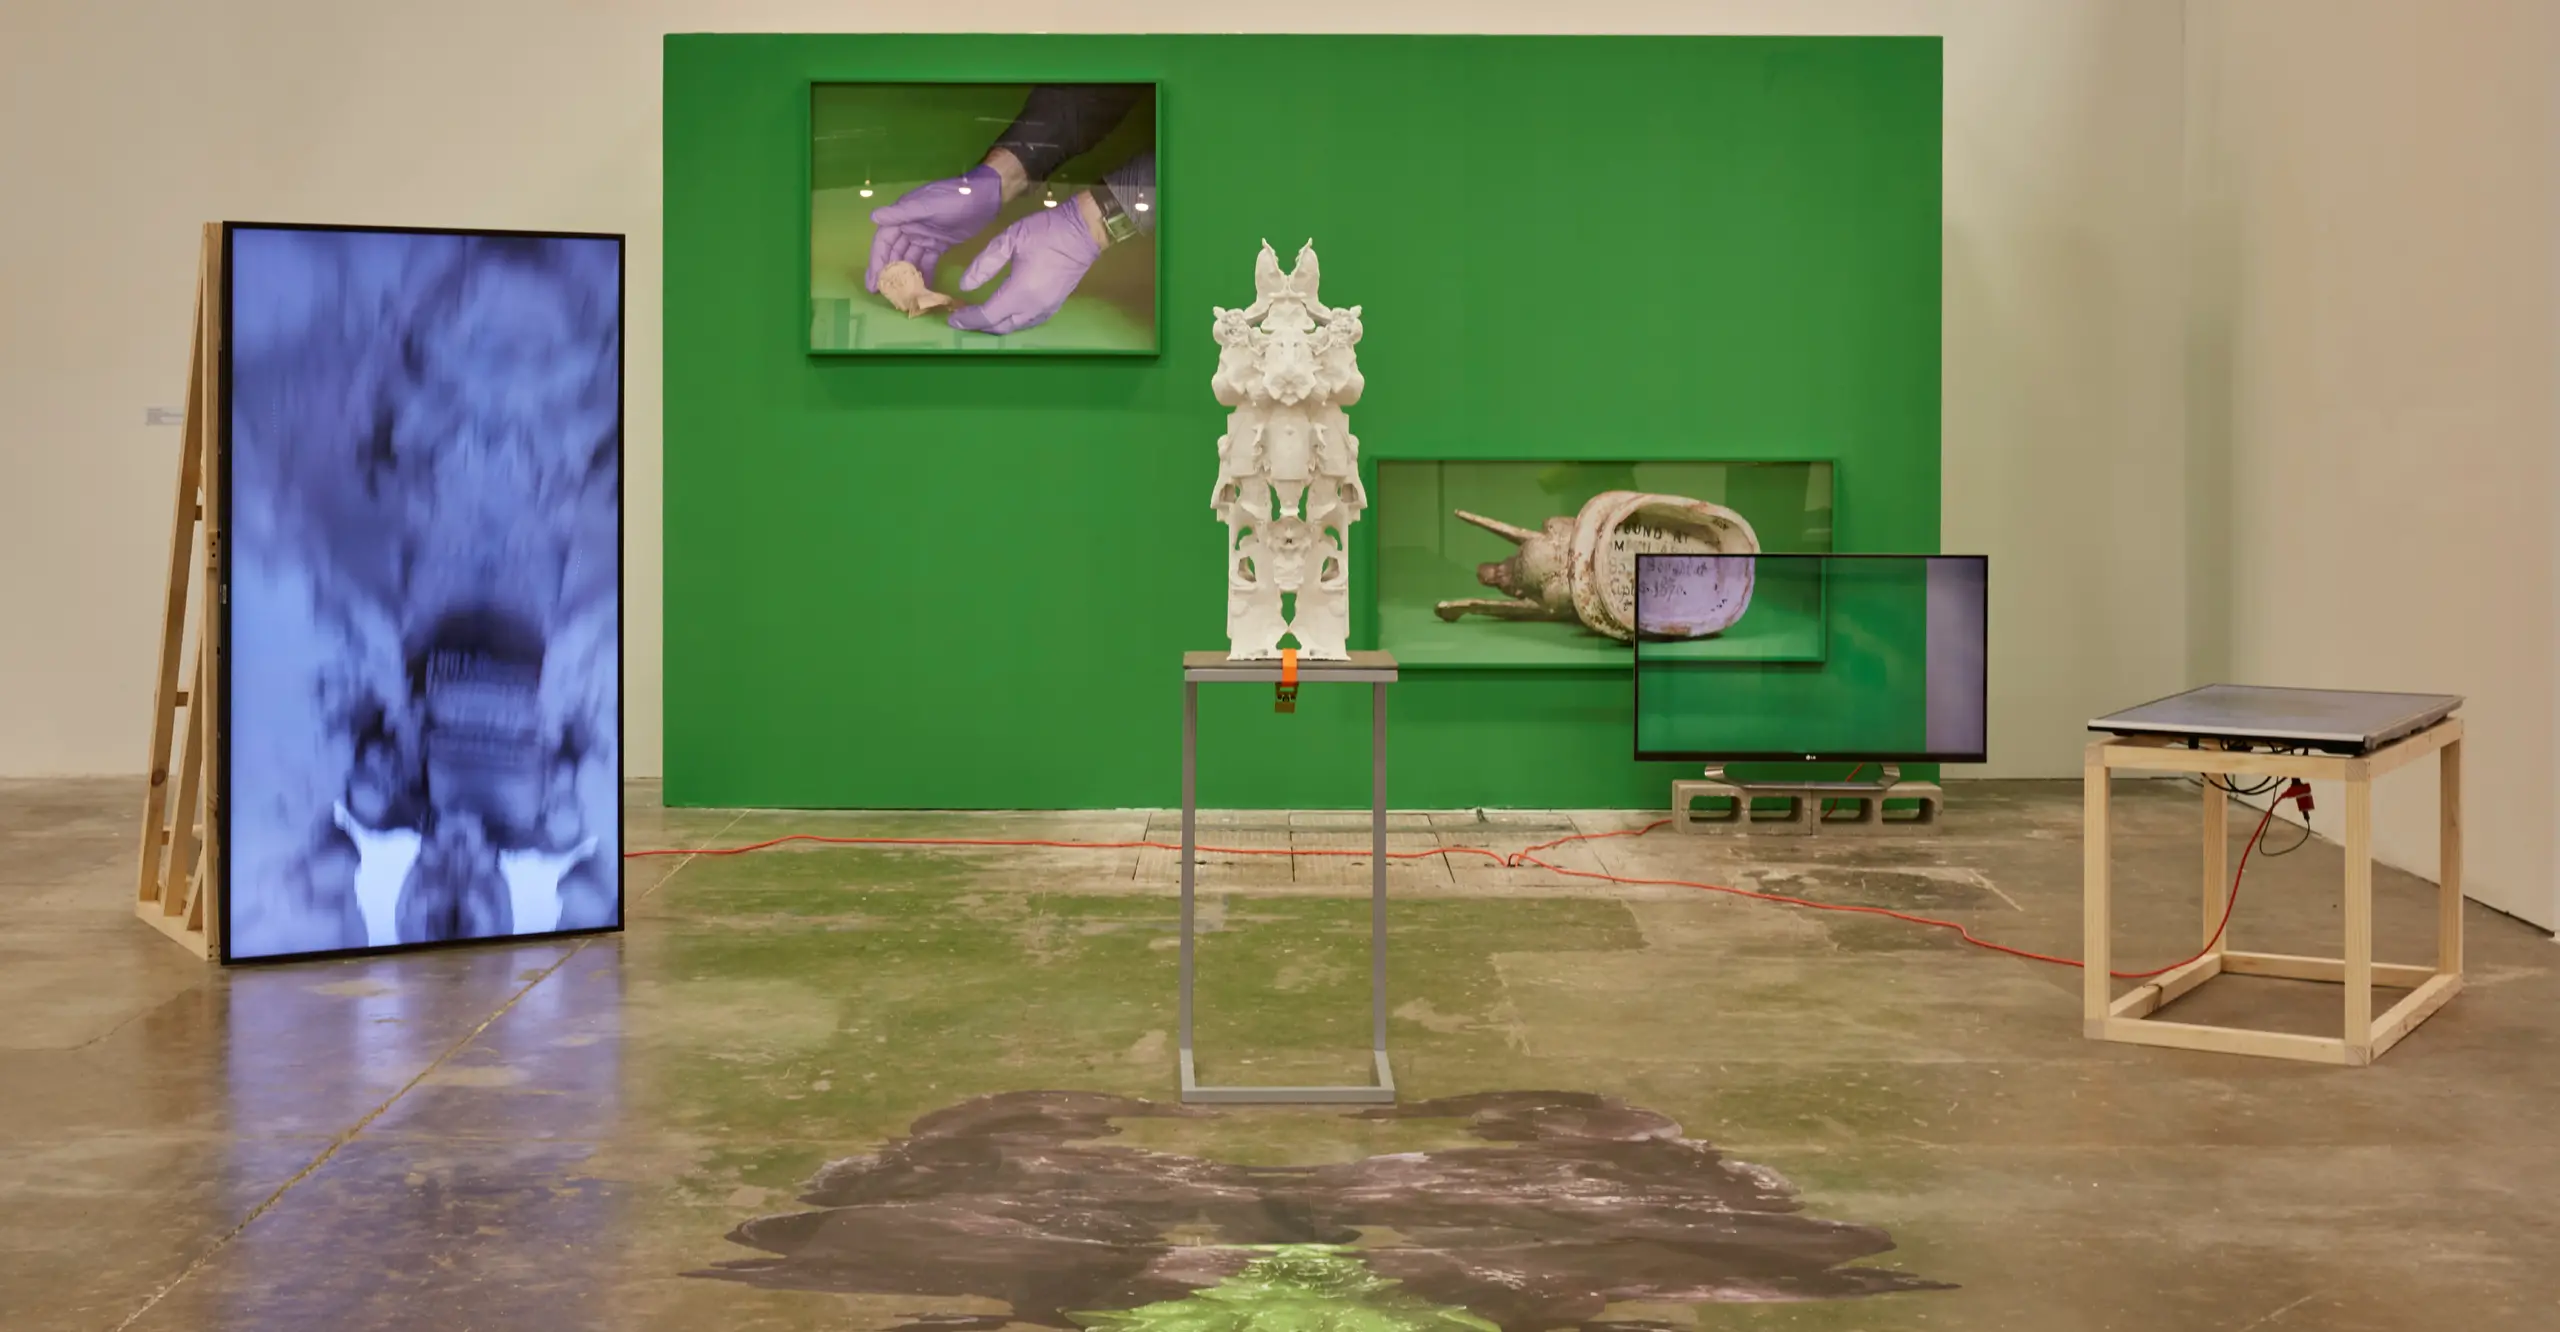 An installation view of an exhibition on a gallery. There's a sculpture in the middle of the image, a built wall painted in green in the back, a large vertical screen on the left and other art works on view.